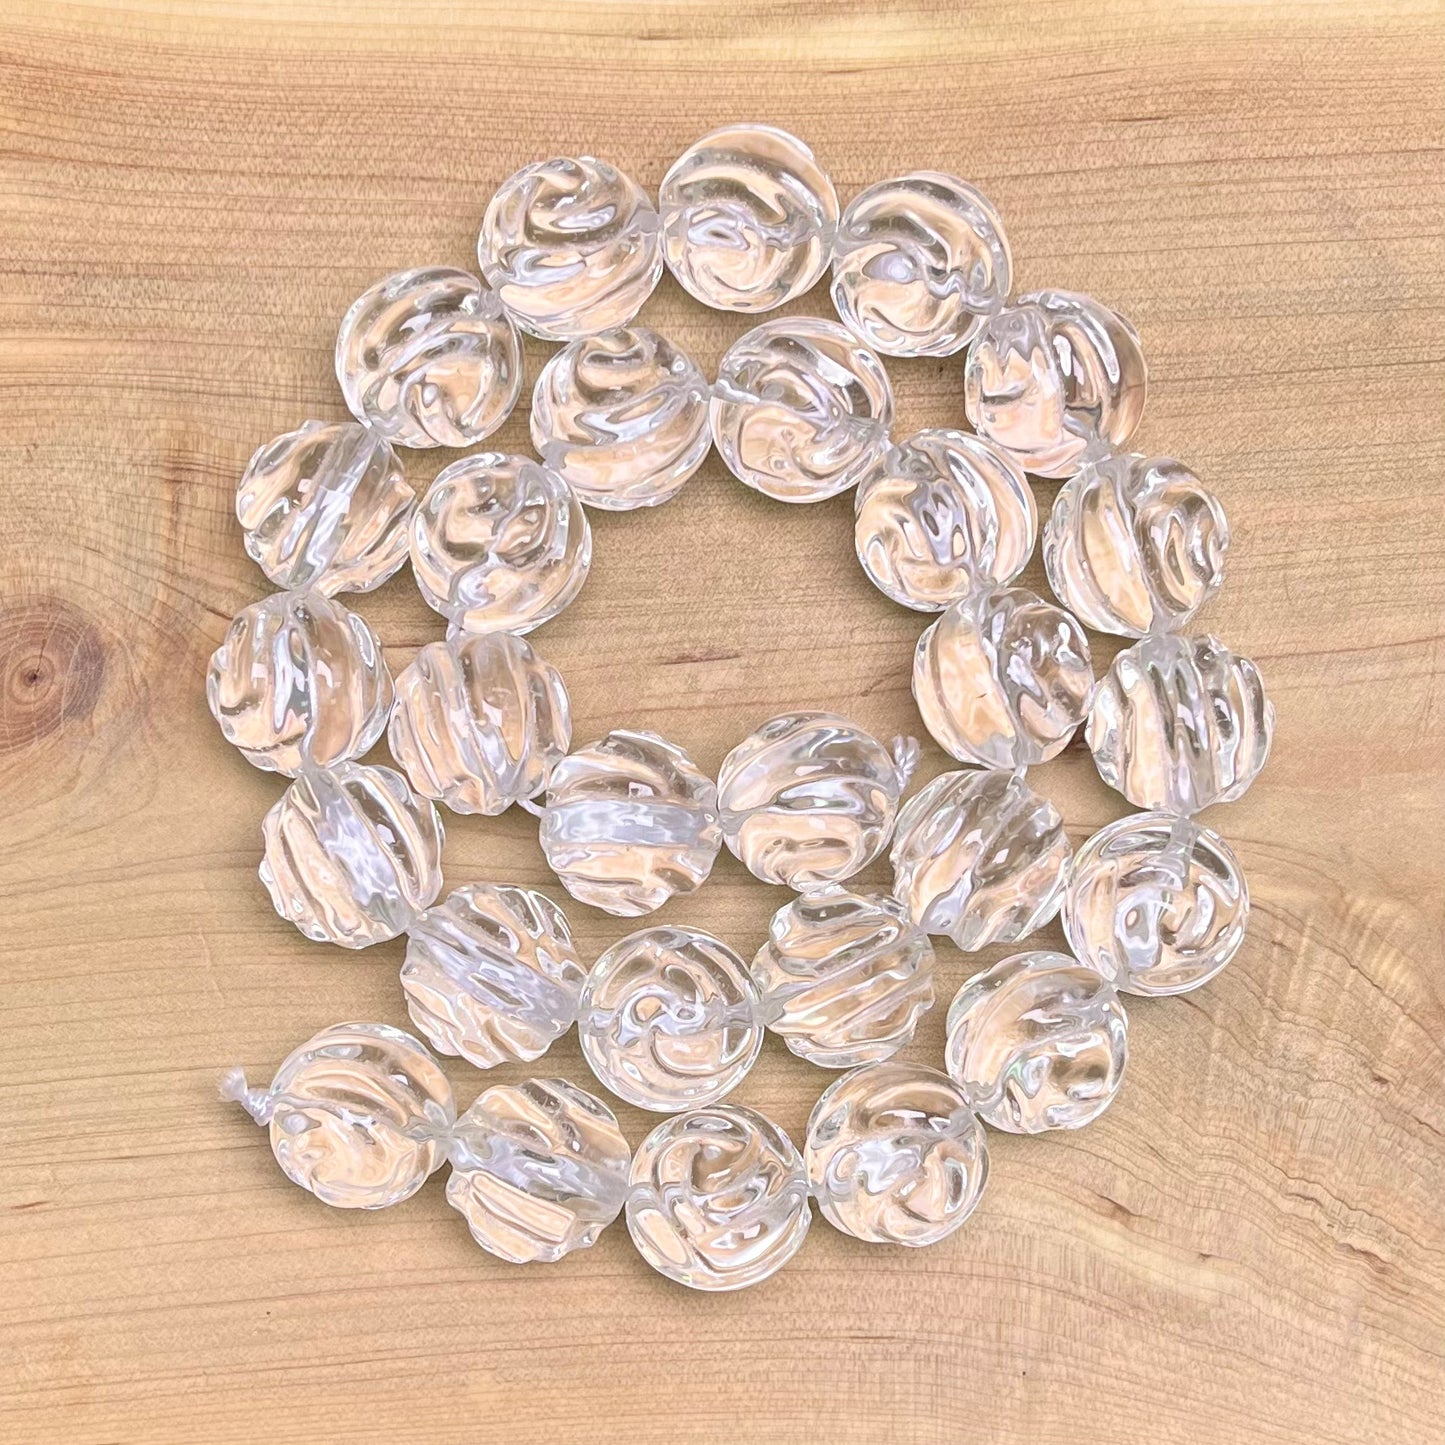 Clear Quartz Double-sided rose carving bead strand 13mm